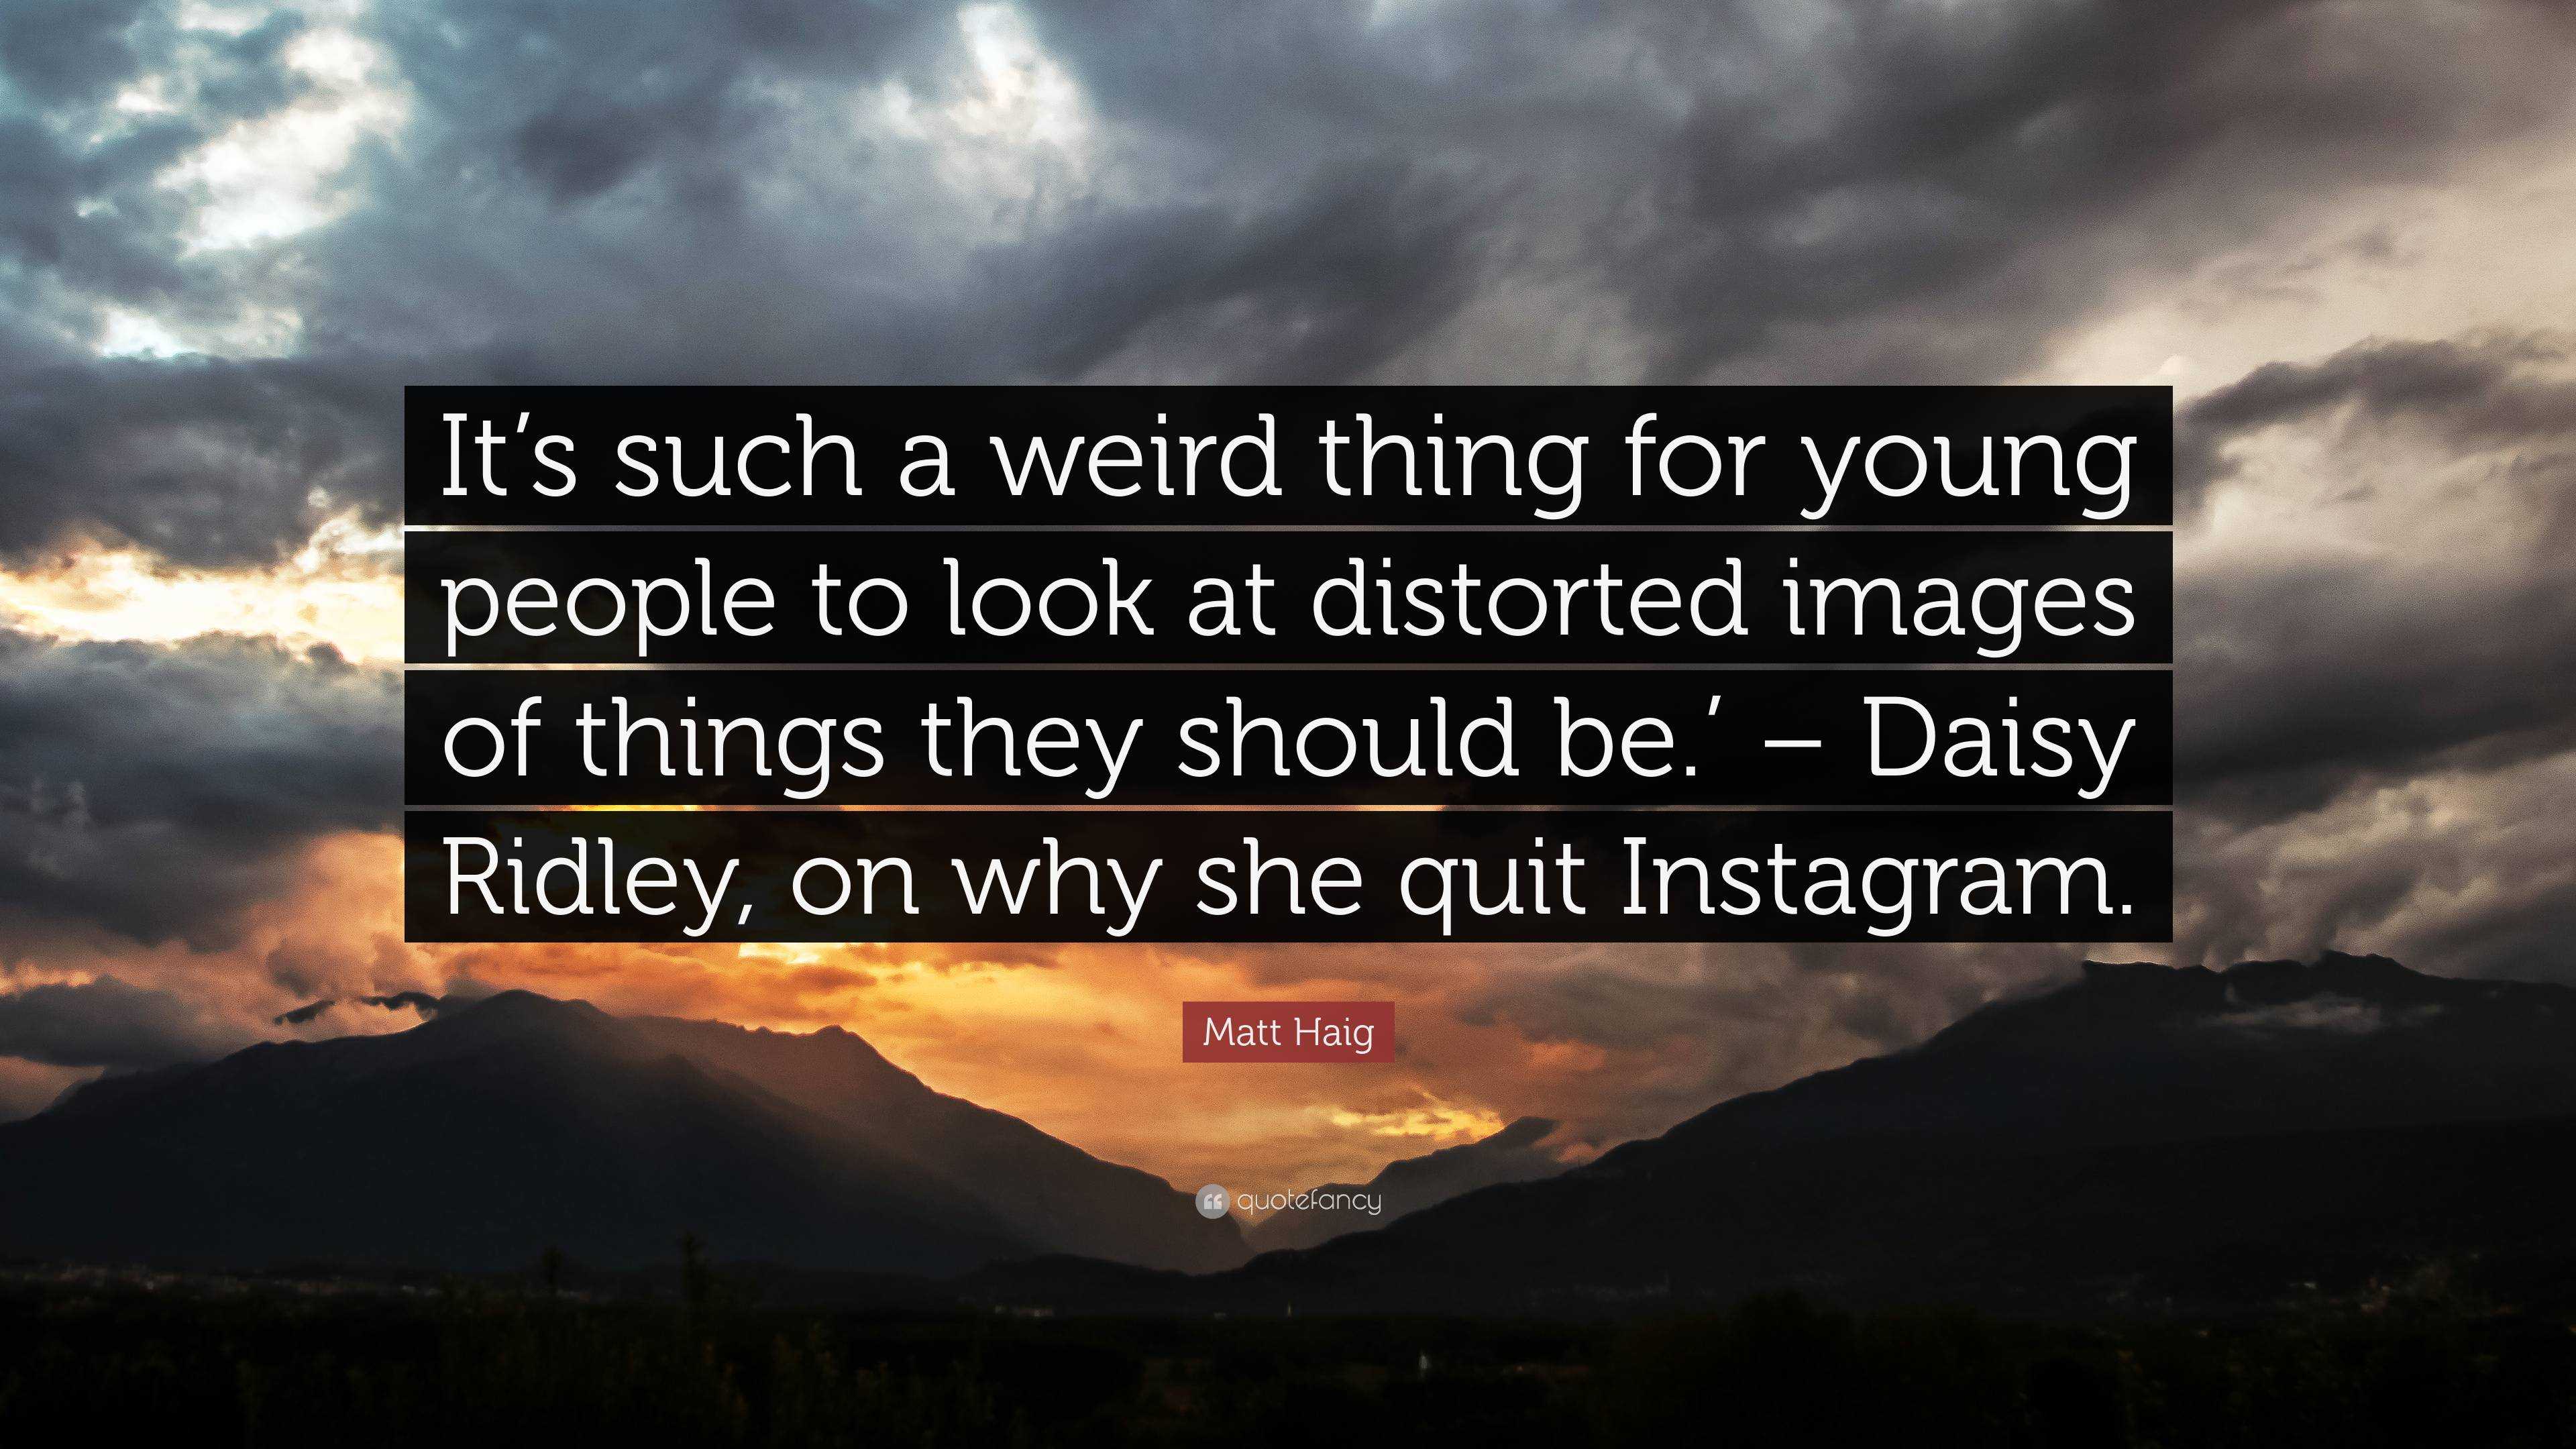 Matt Haig Quote: “It's such a weird thing for young people to look at  distorted images of things they should be.' – Daisy Ridley, on why s...”